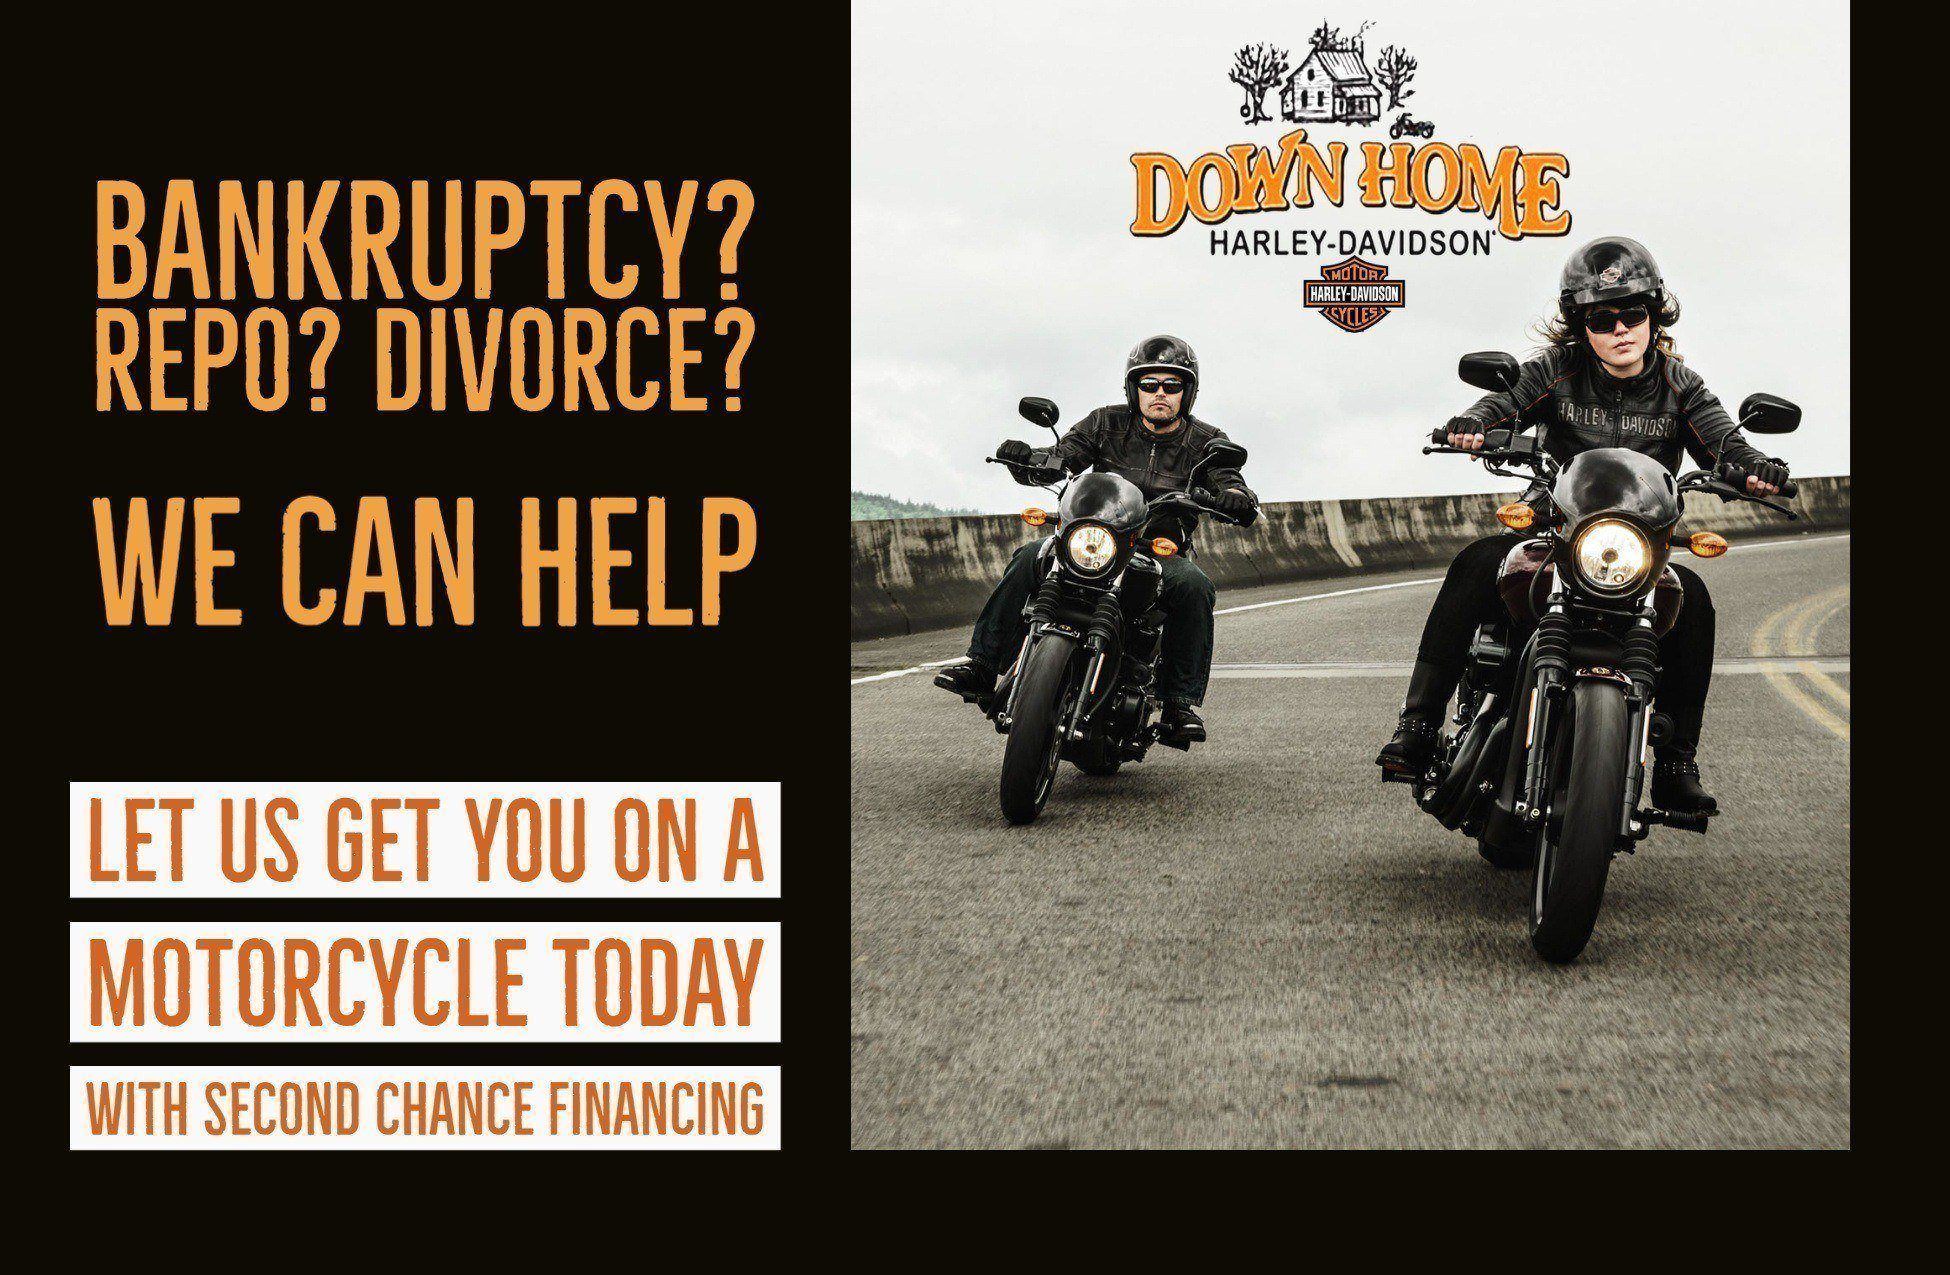 Second Chance Financing at Down Home Harley-Davidson.